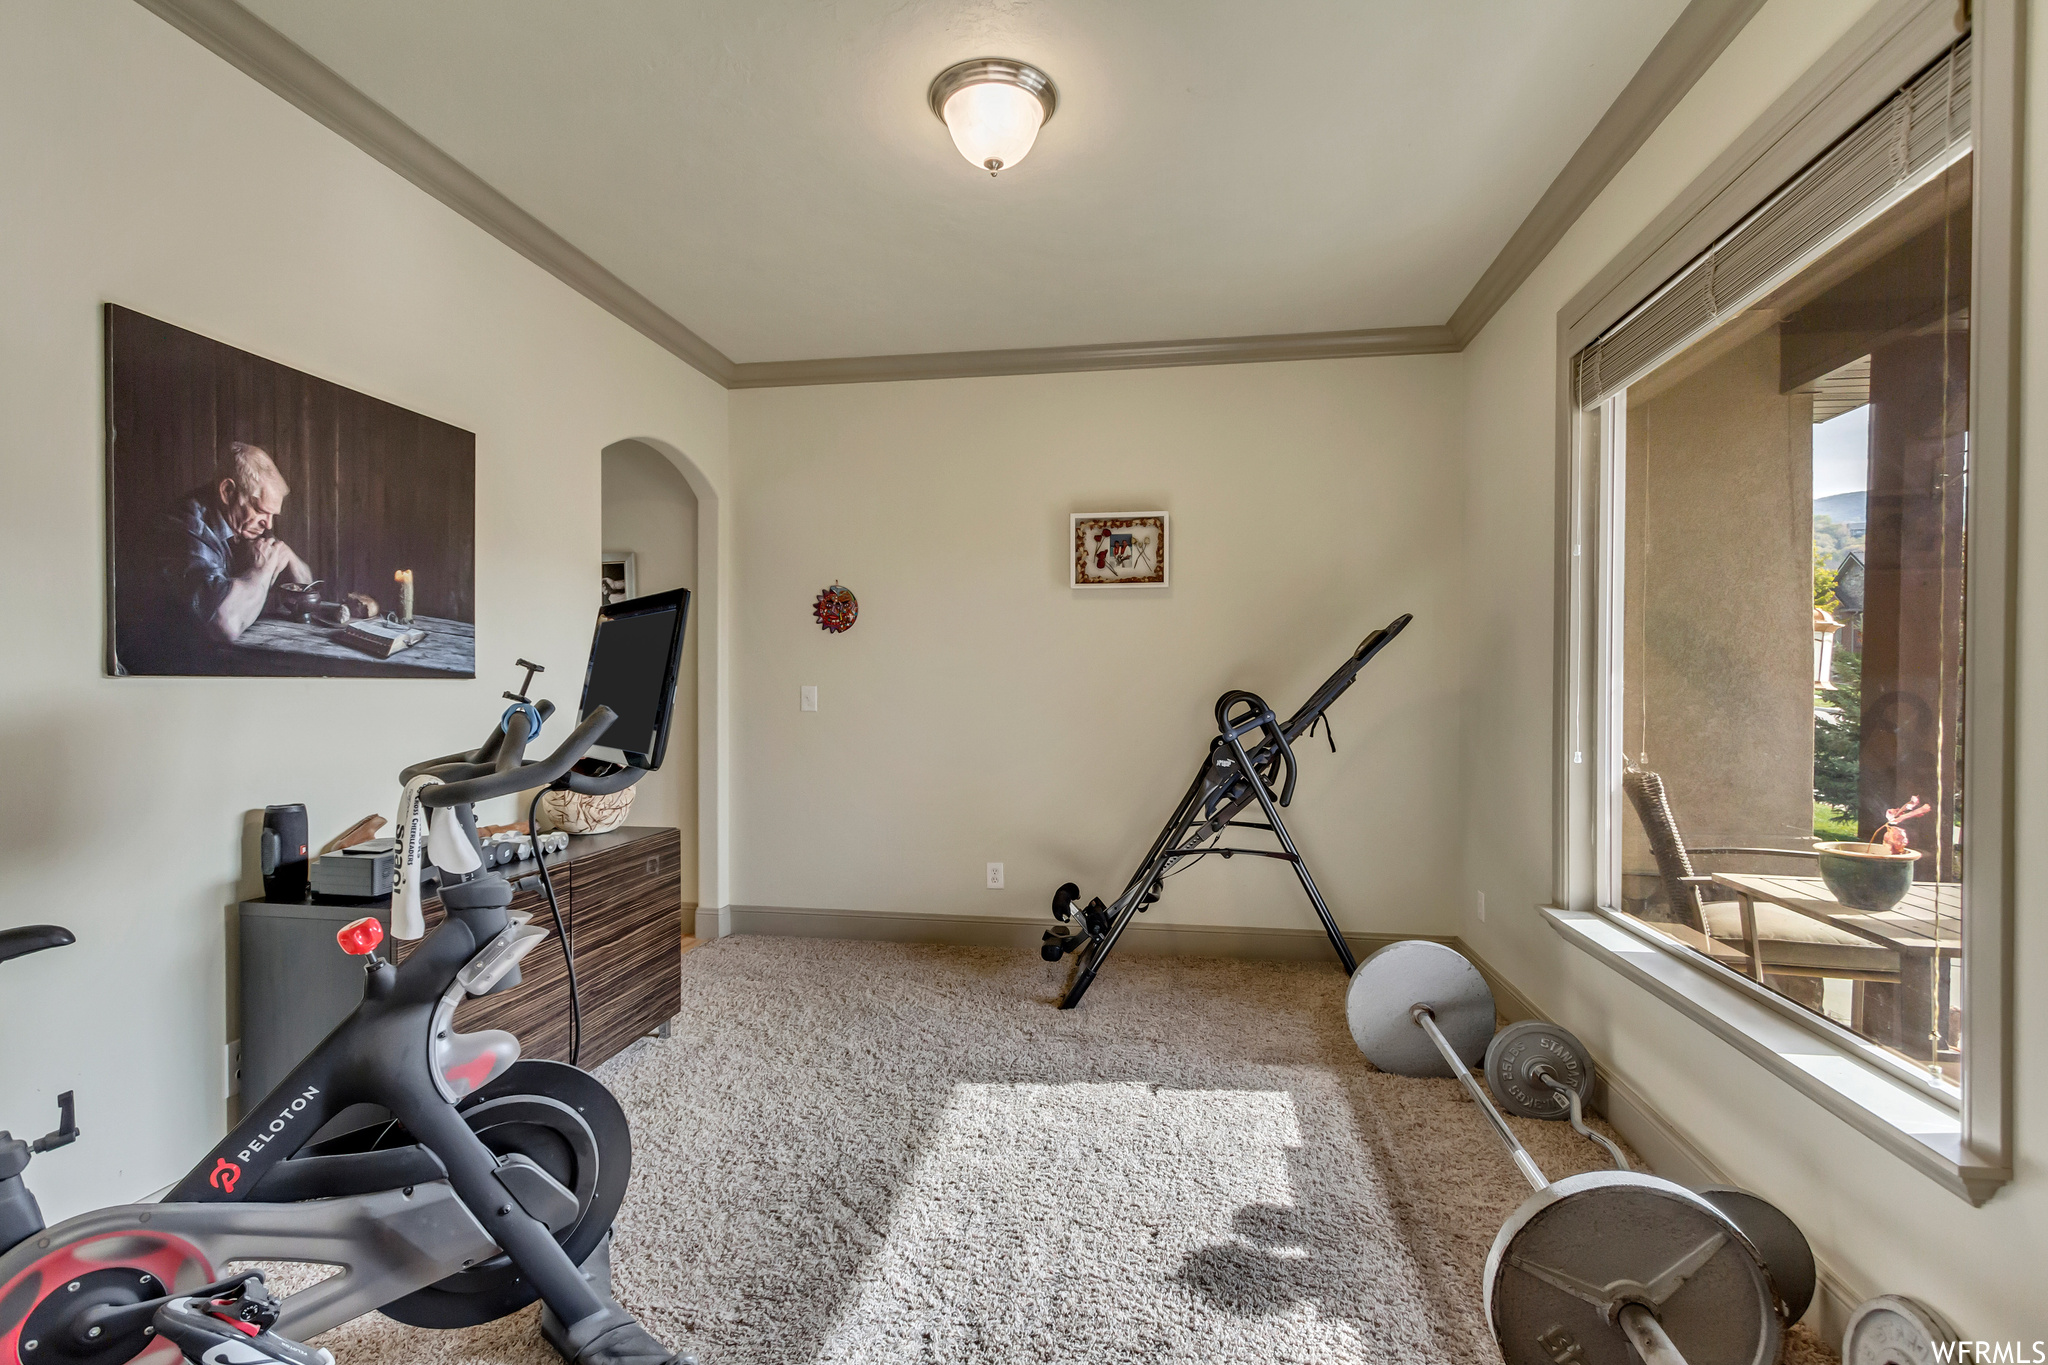 Exercise area featuring light carpet and crown molding with lots of natural light.